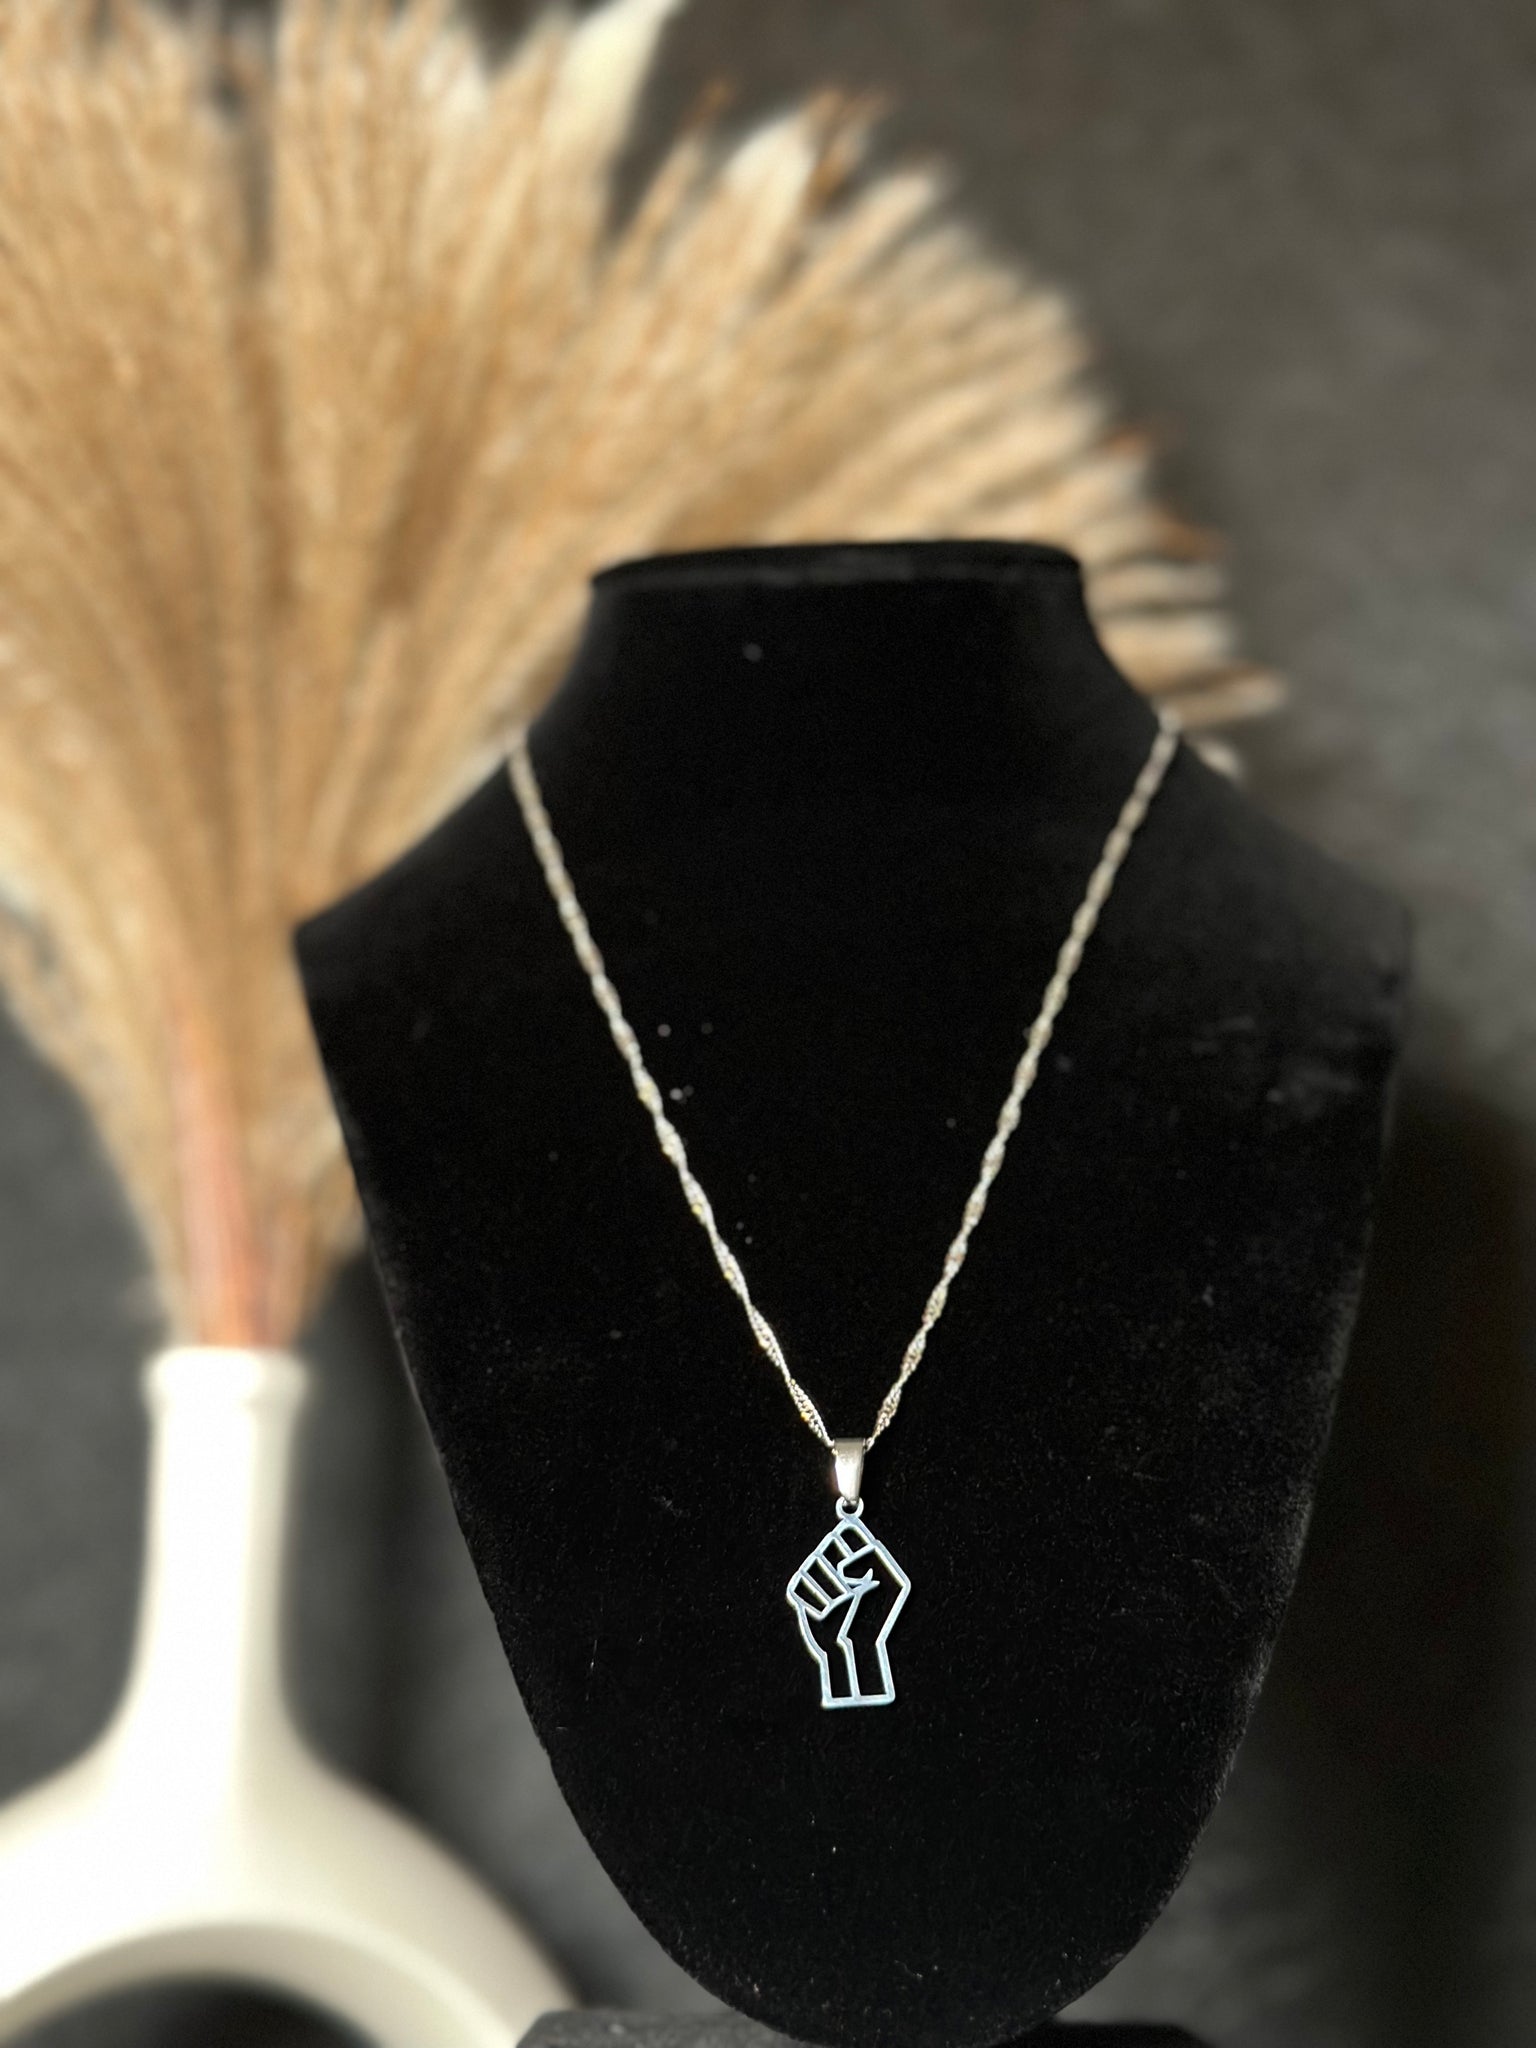 Fist Up necklace